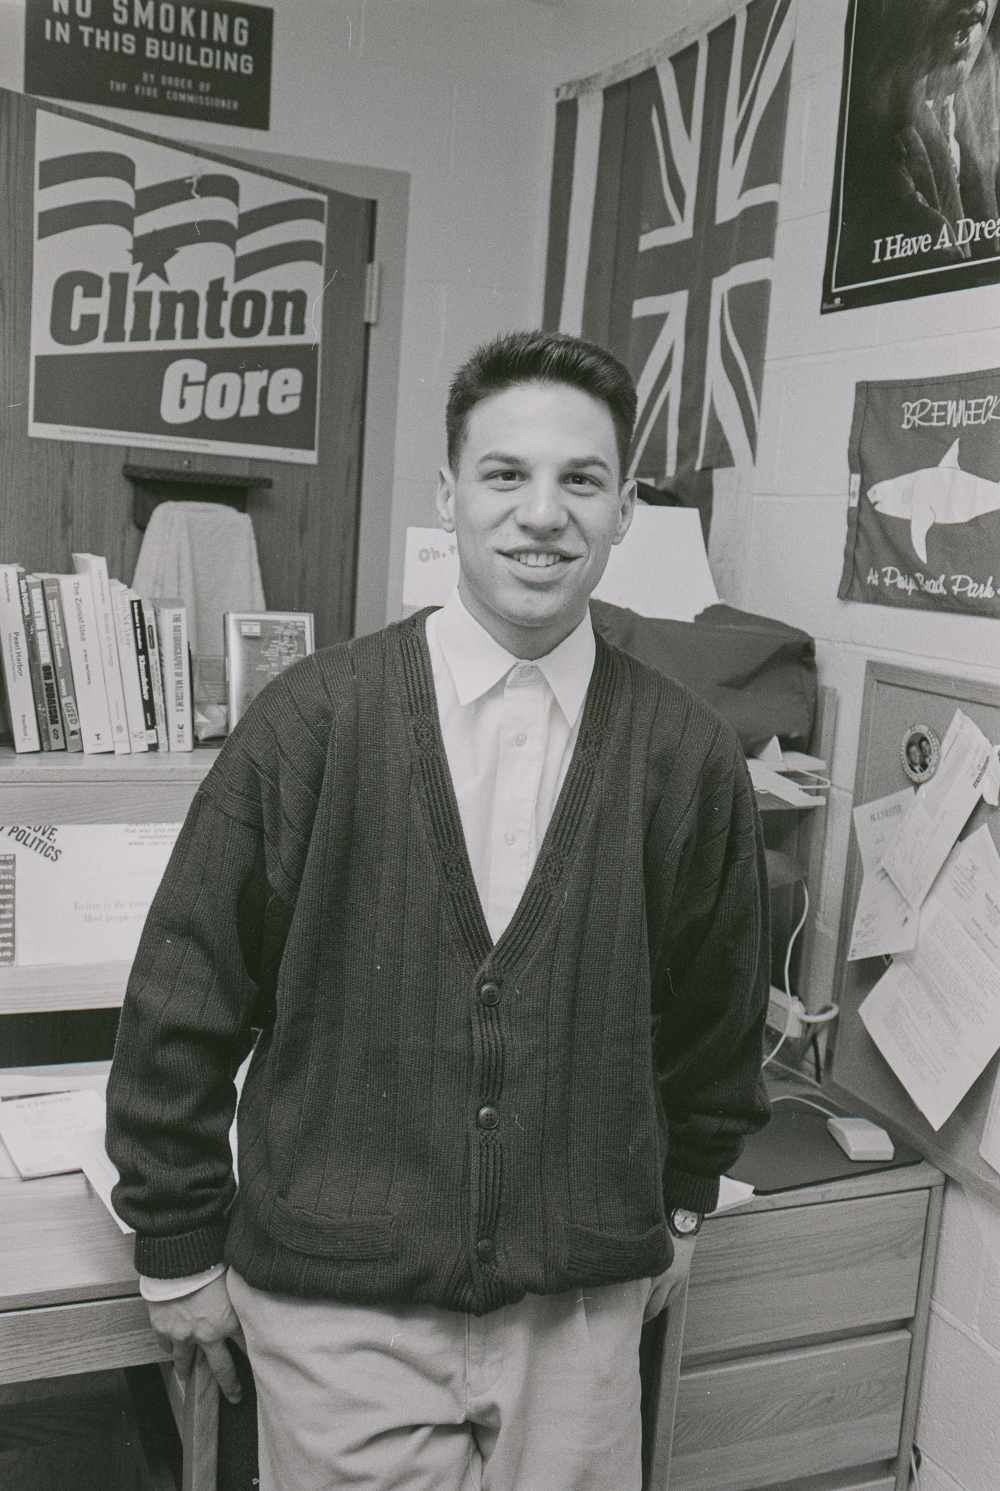 Black and white archival photo of Josh Shapiro as an undergraduate in his dorm room with a Clinton/Gore sign, UK flag, and other posters and artwork in the background.